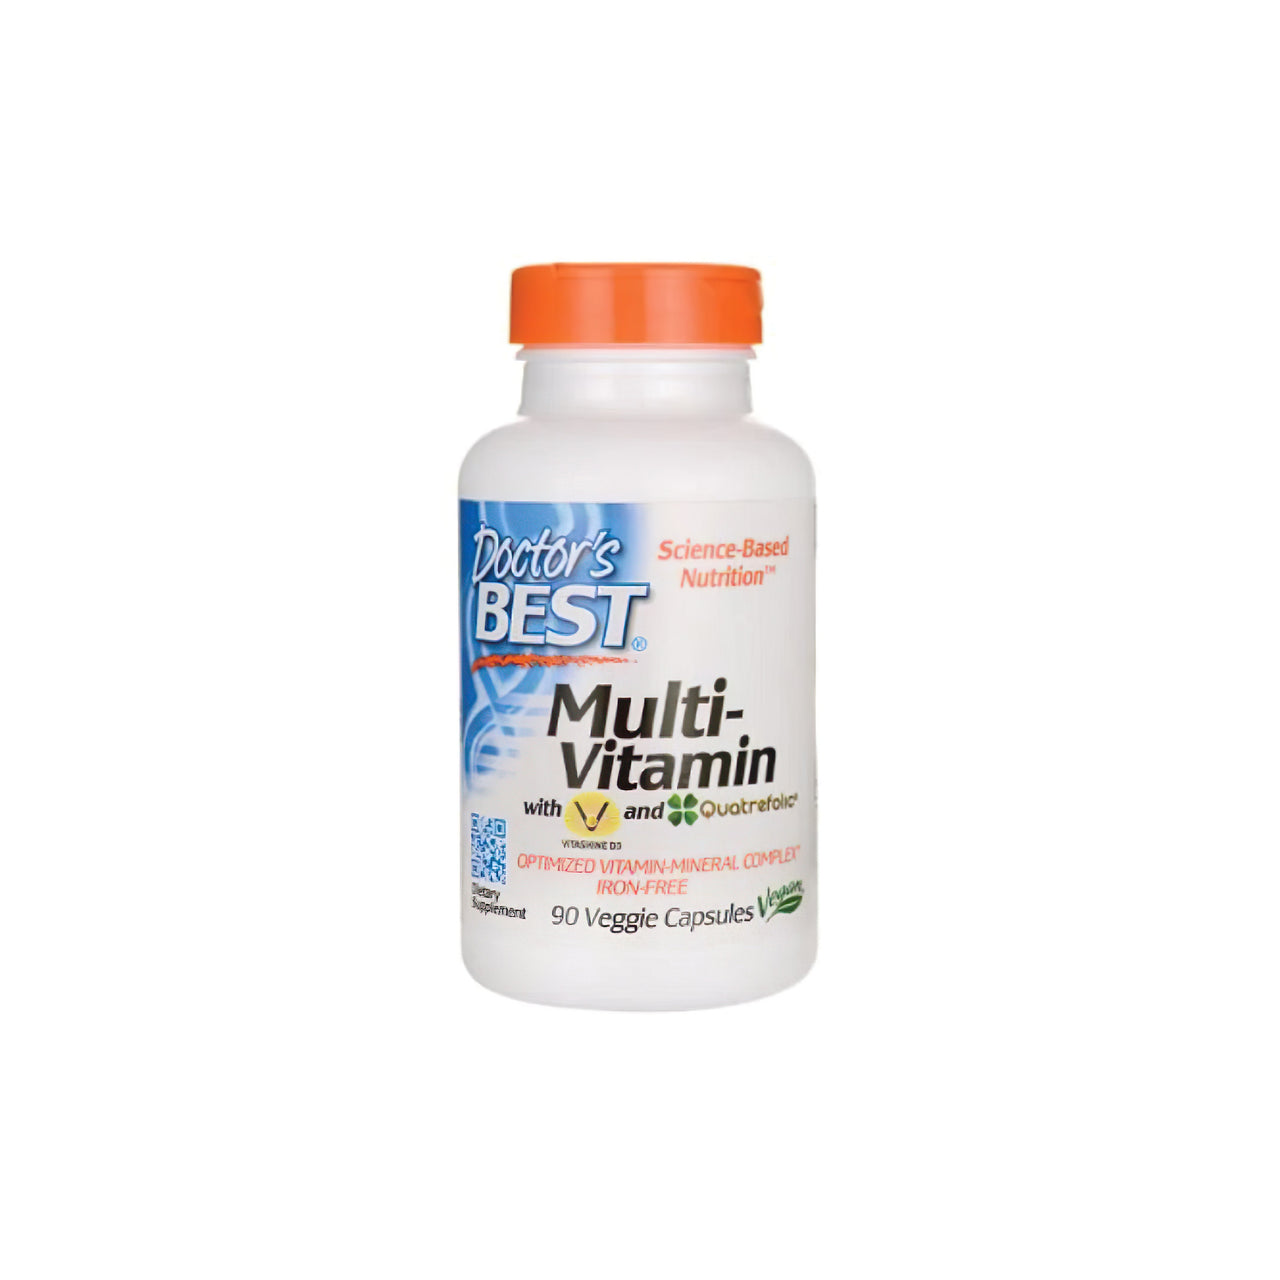 The best Doctor's Best Multivitamin 90 vege capsules to support the immune system, packed with essential minerals, showcased on a white background.